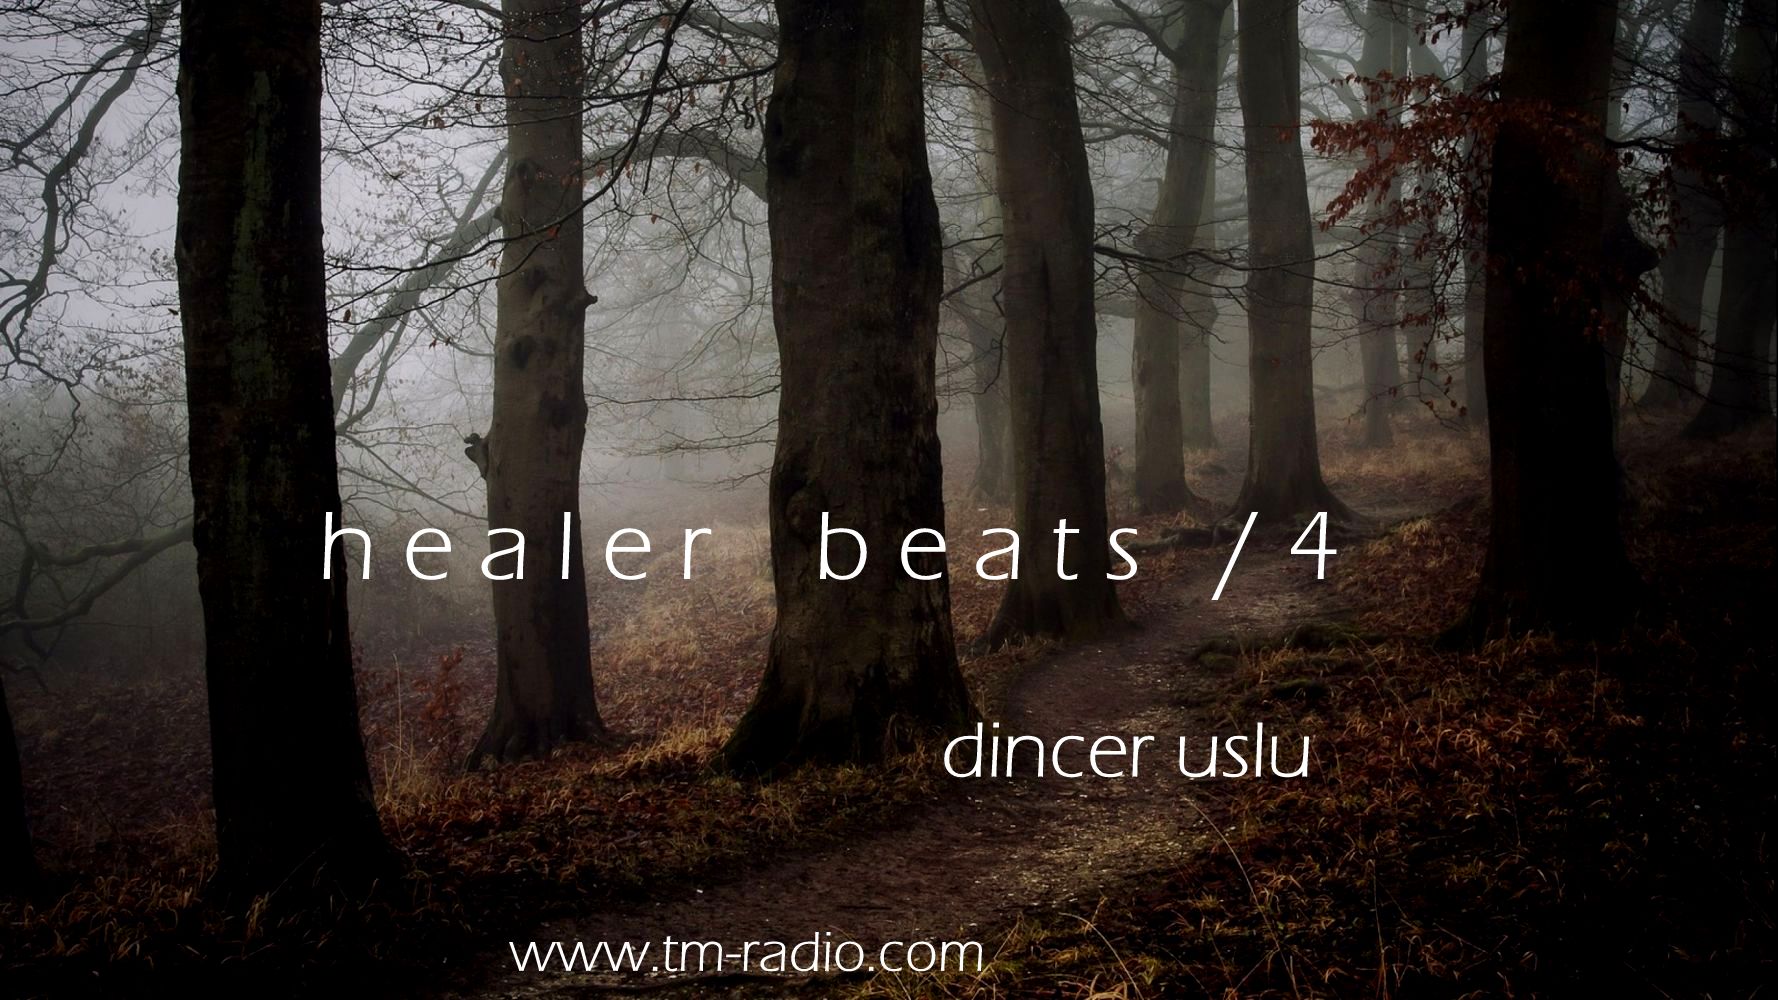 HEALER BEATS :: Episode aired on July 11, 2020, 8pm banner logo